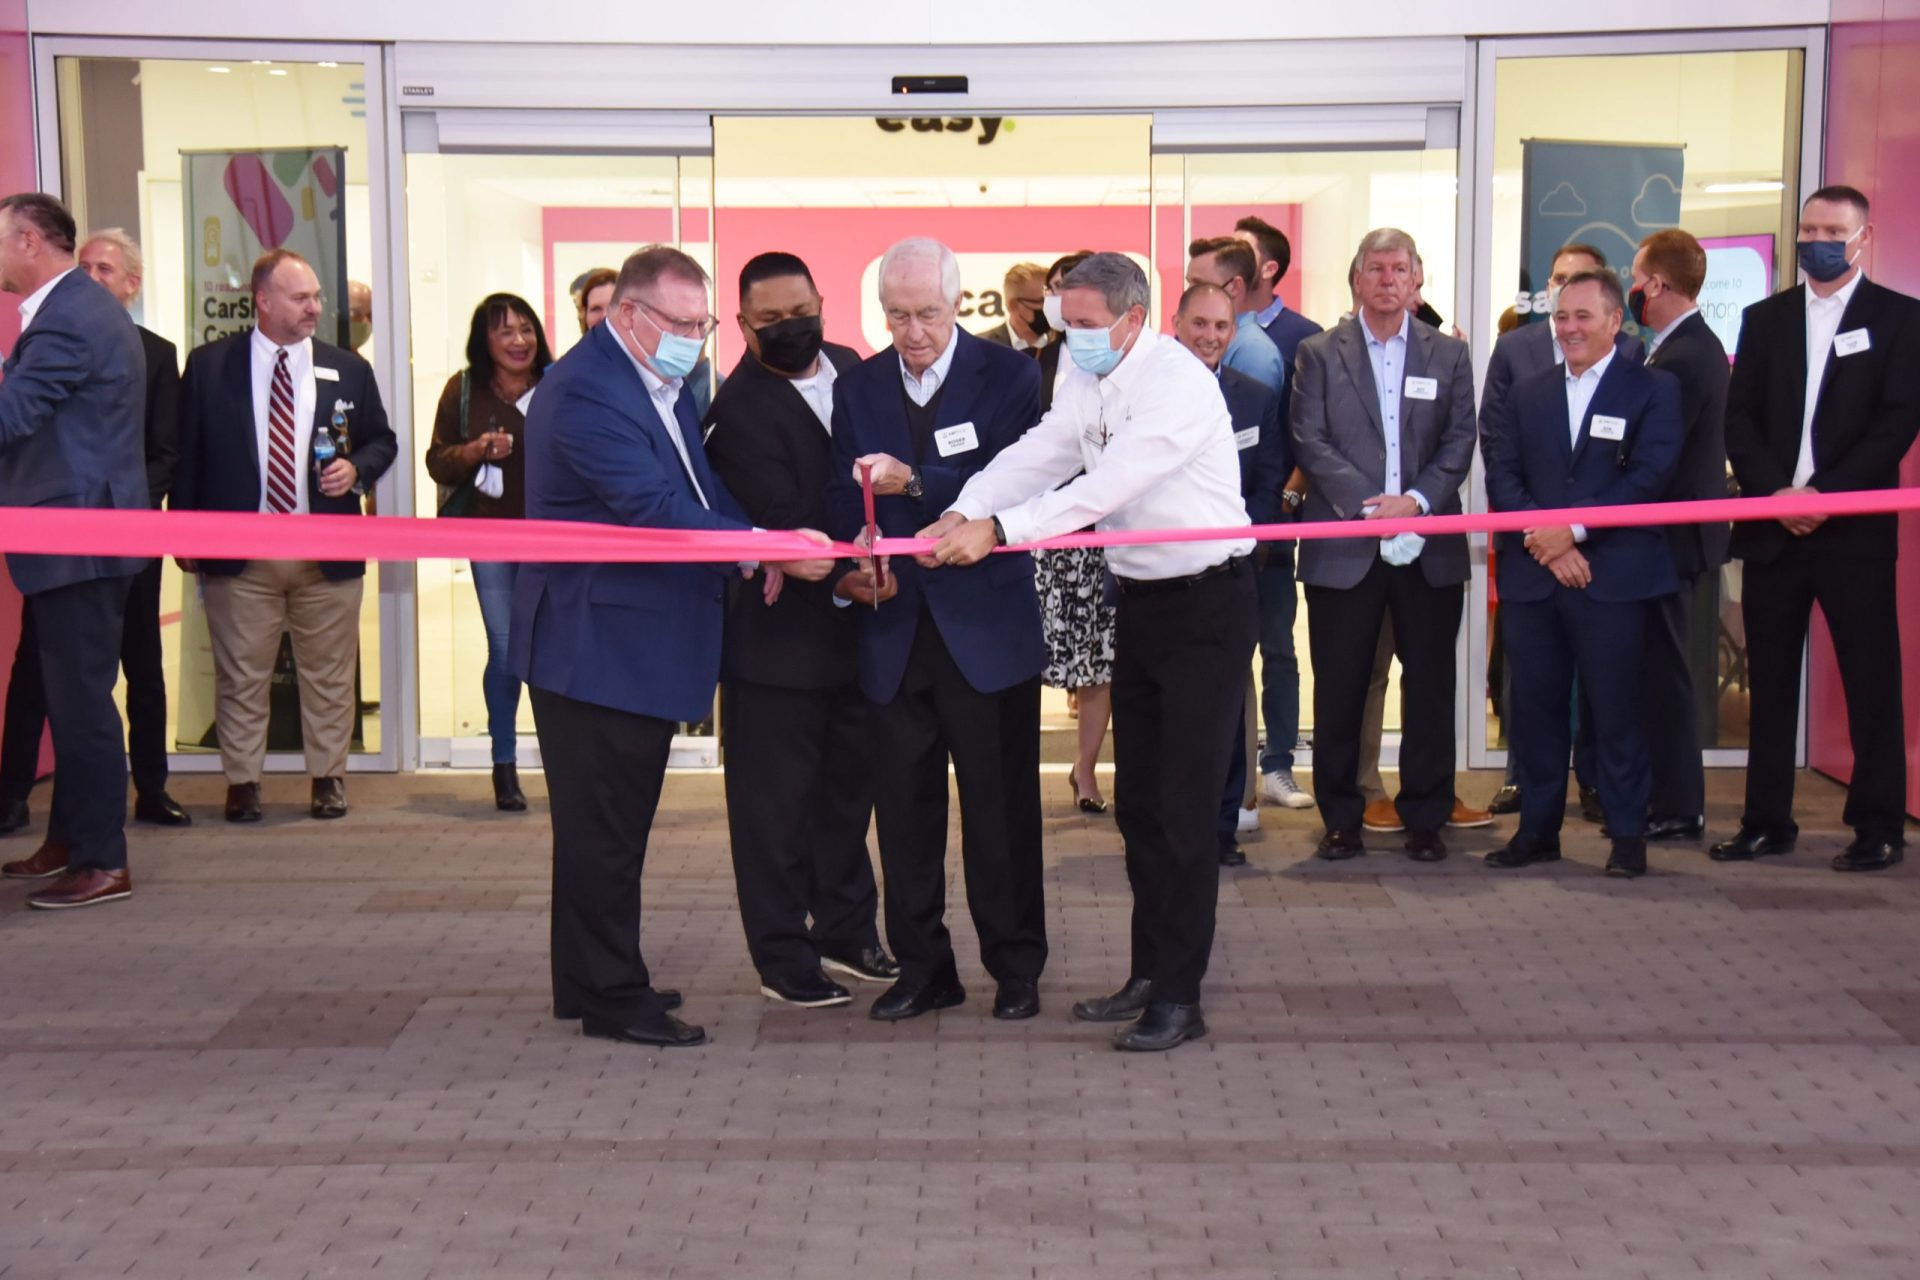 CarShop Holds Grand Opening in the Community